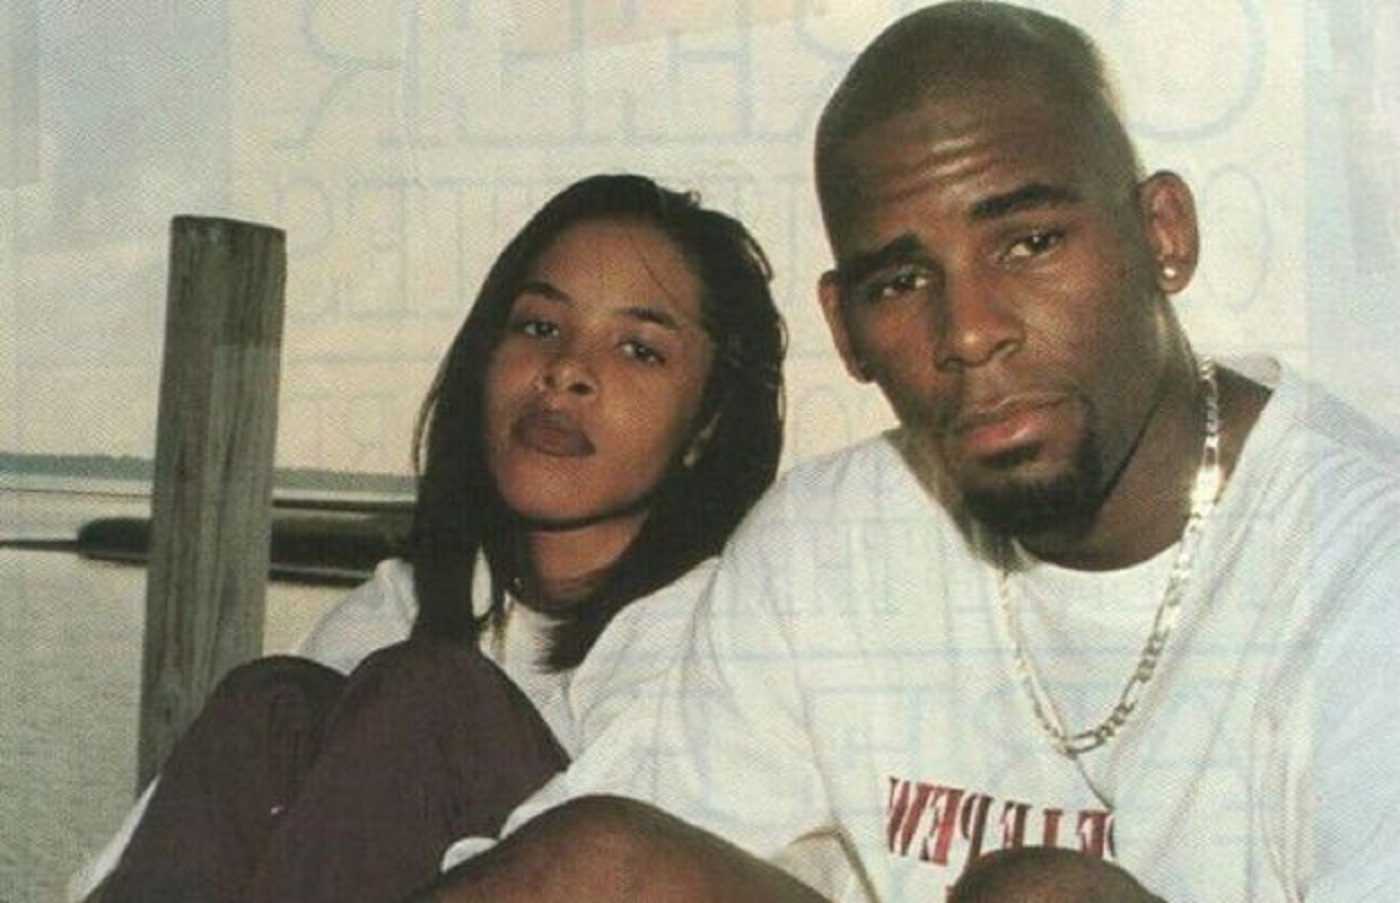 Digging into the scandalous past of rapper R.Kelly who’s recently been accused of having a sex cult